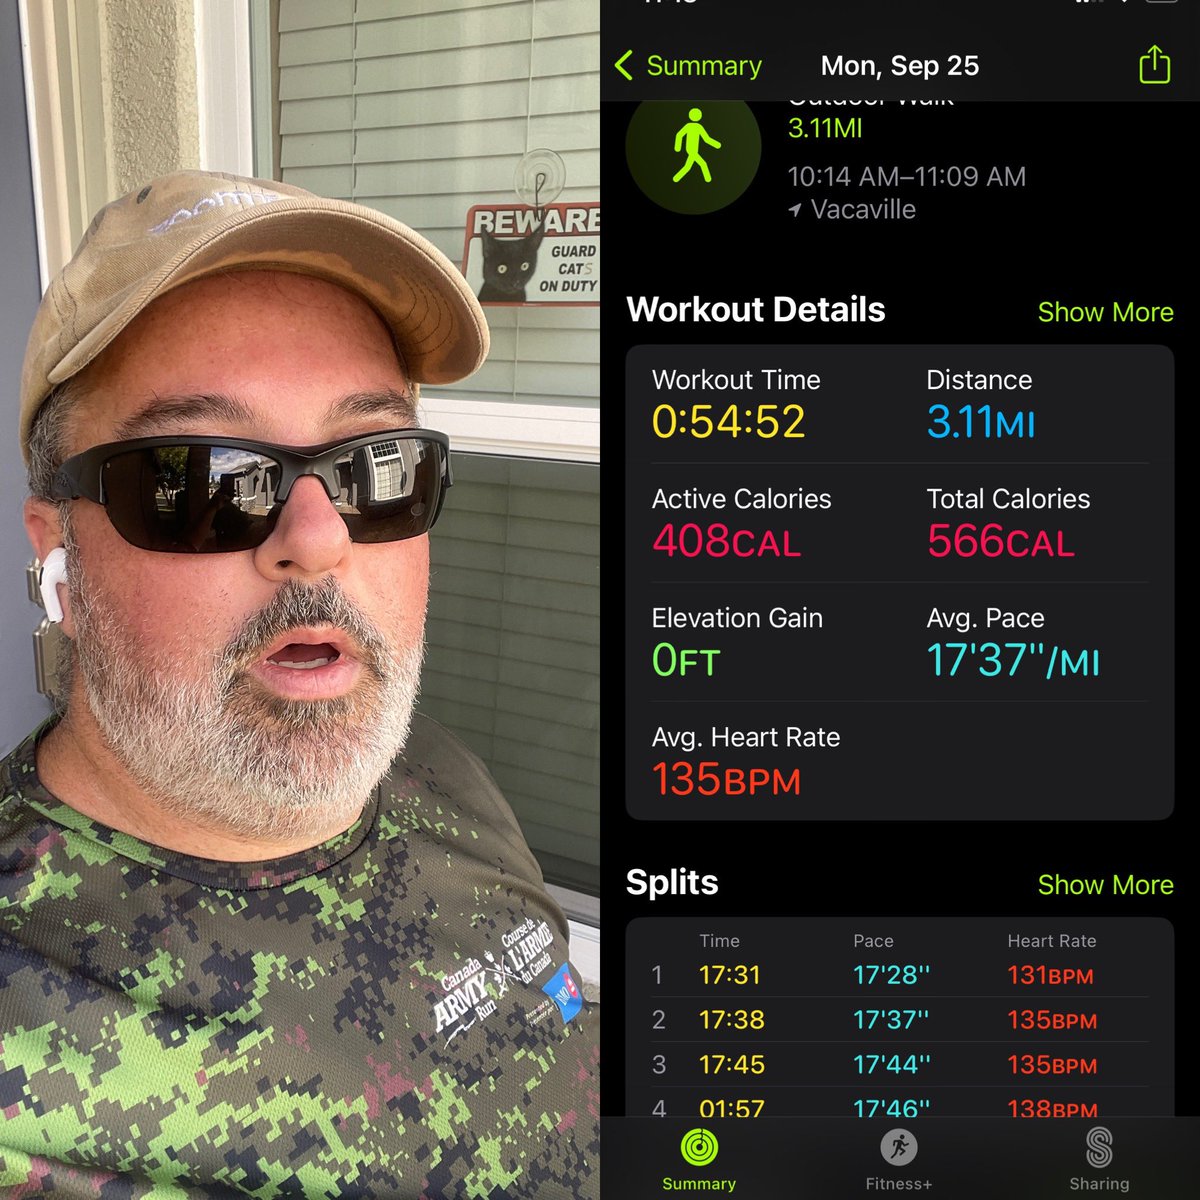 Completed my virtual @CanadaArmyRun today.  Beat my best time for a 5K by over six minutes. #ArmyRun